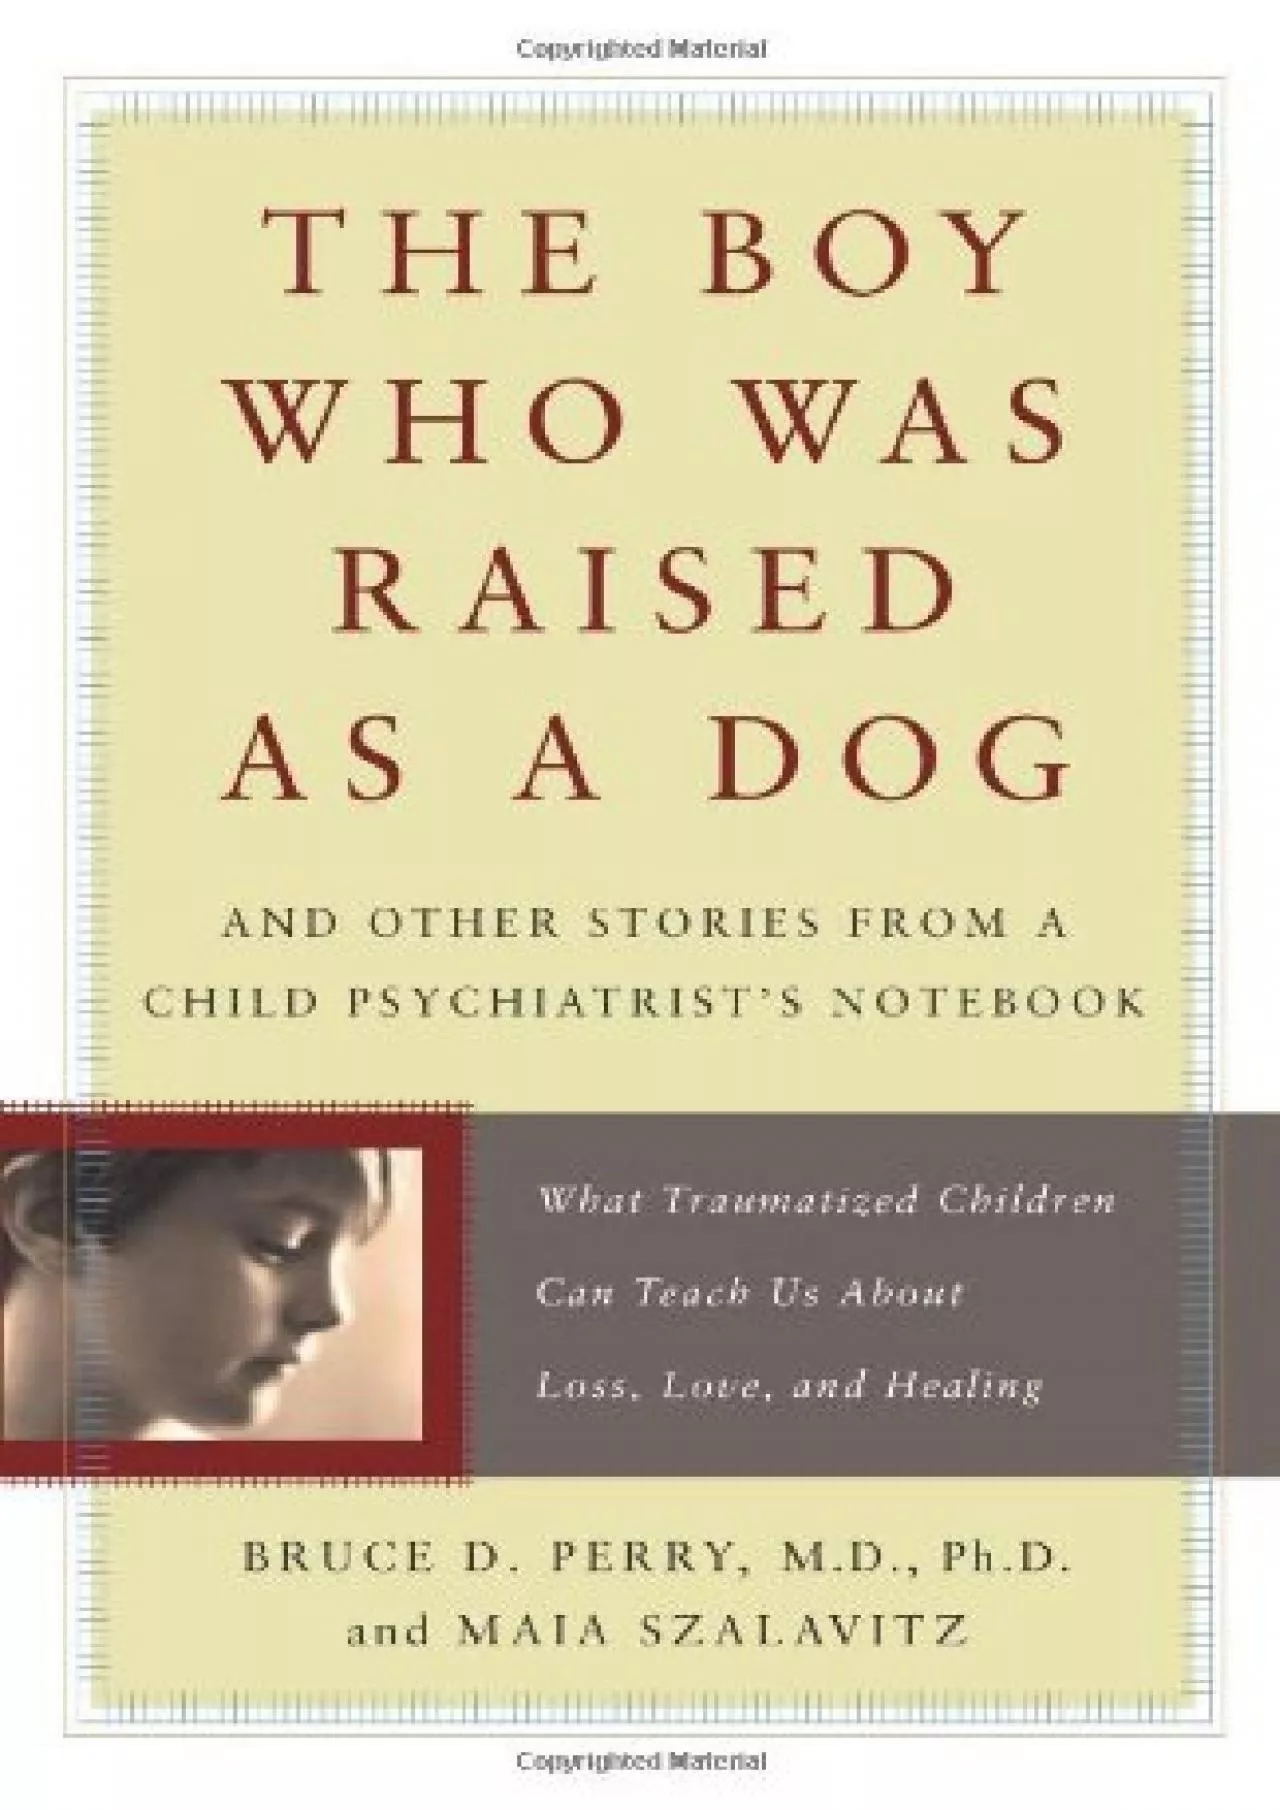 (DOWNLOAD)-The Boy Who Was Raised As a Dog: And Other Stories from a Child Psychiatrist\'s